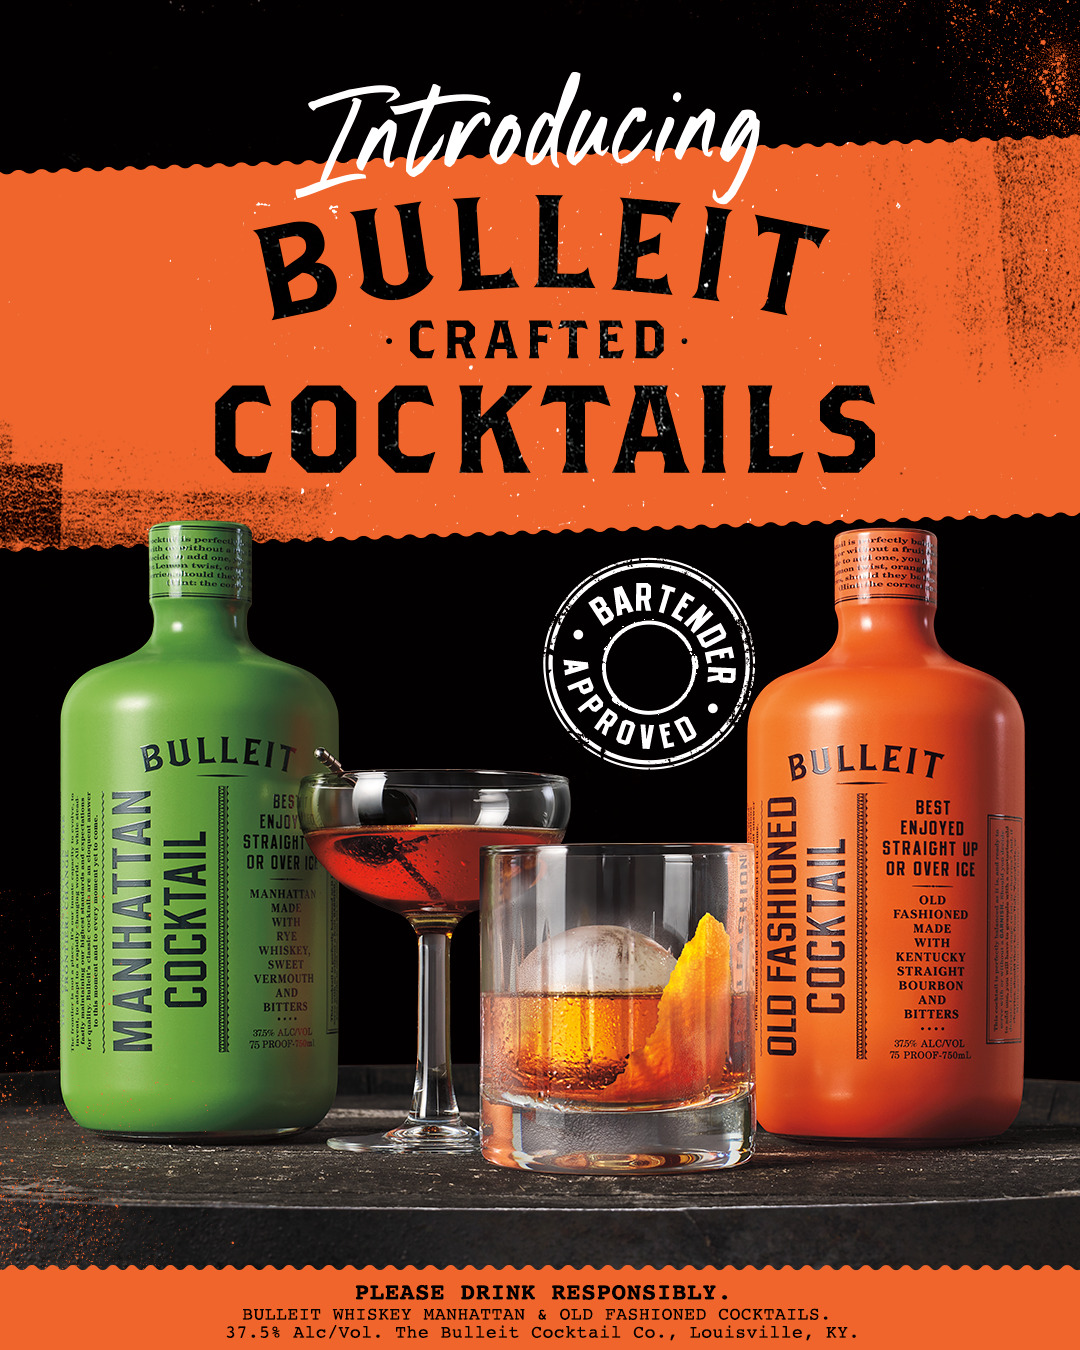 A New Frontier for Bulleit Bourbon with Ready Made Cocktails